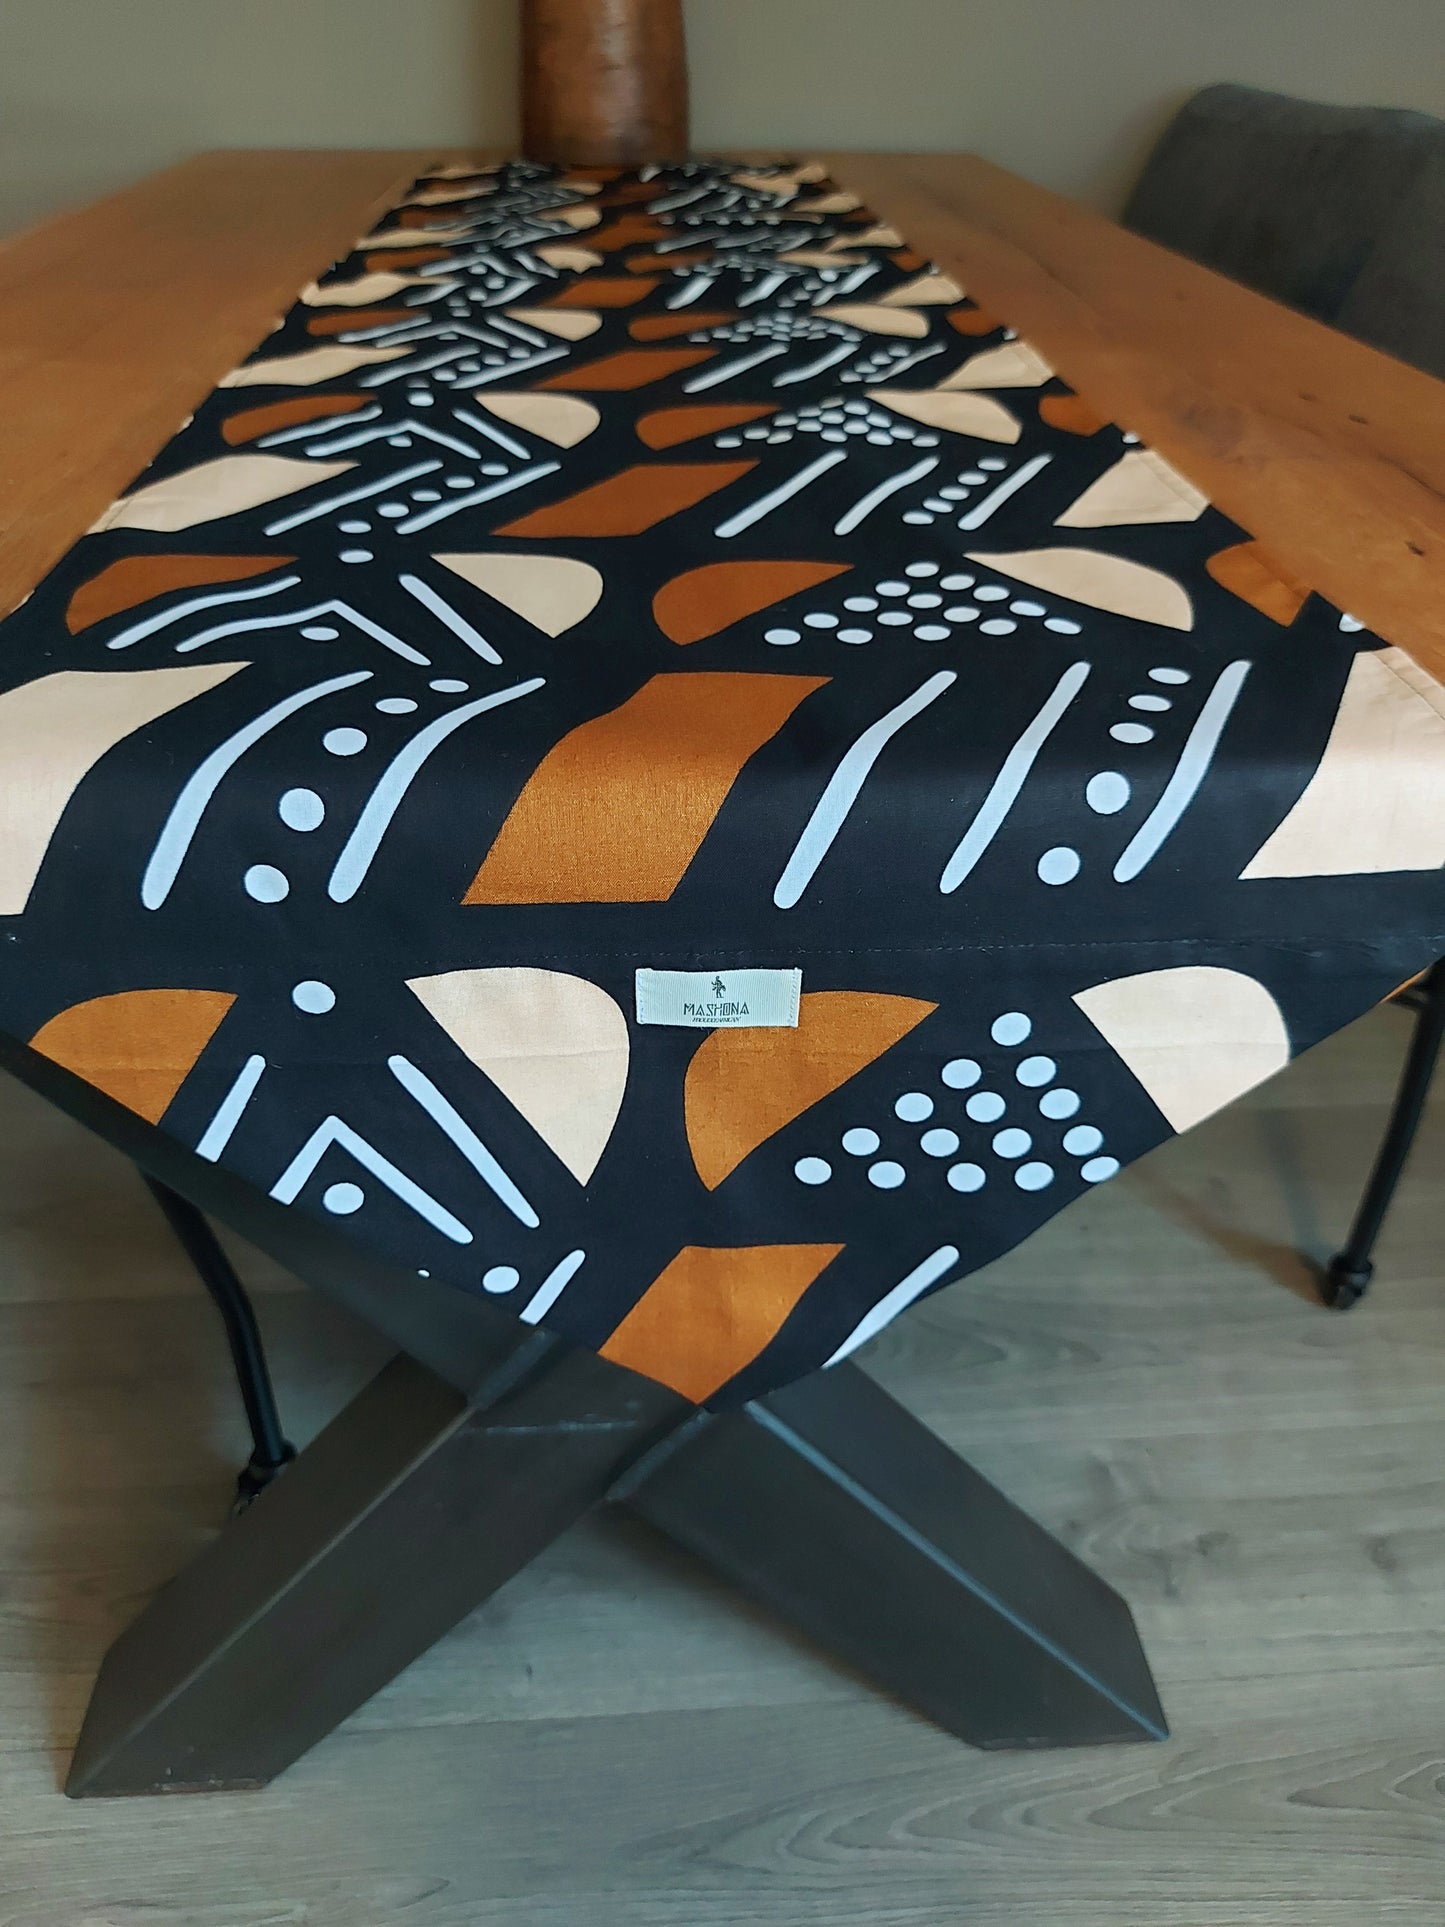 Handmade African Print "Mudcloth" Bogolan Inspired Print Table Runner Made from 100% African Print Fabric